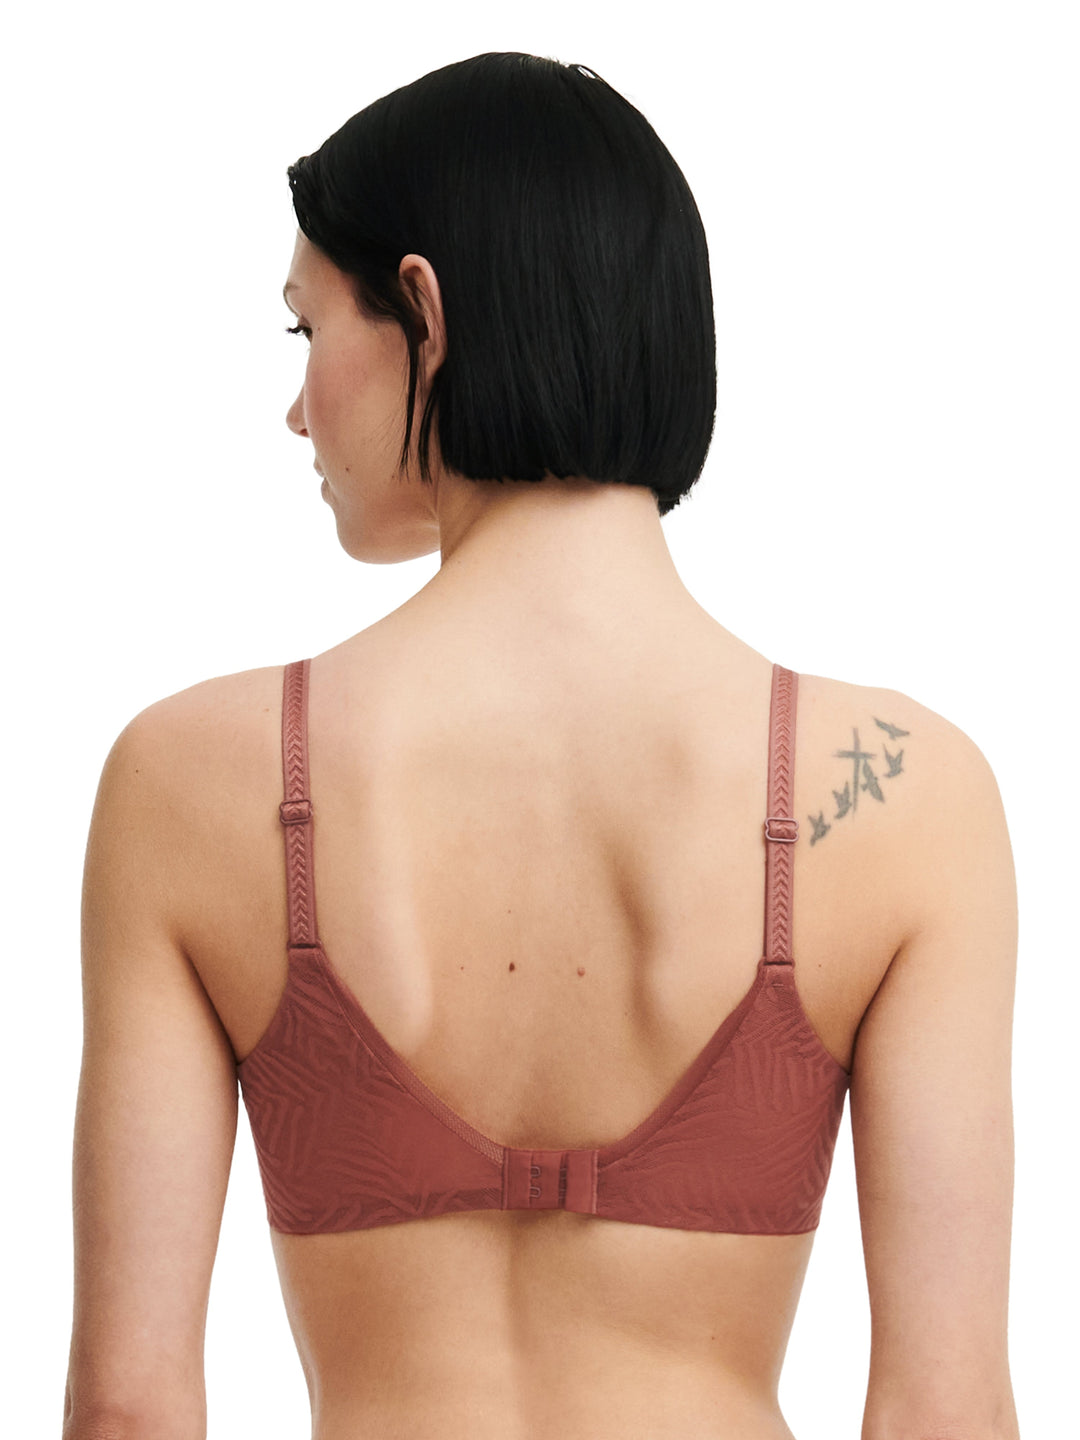 Chantelle - Graphic Allure Covering Spacer Bra Amber Spacer Bra Chantelle 